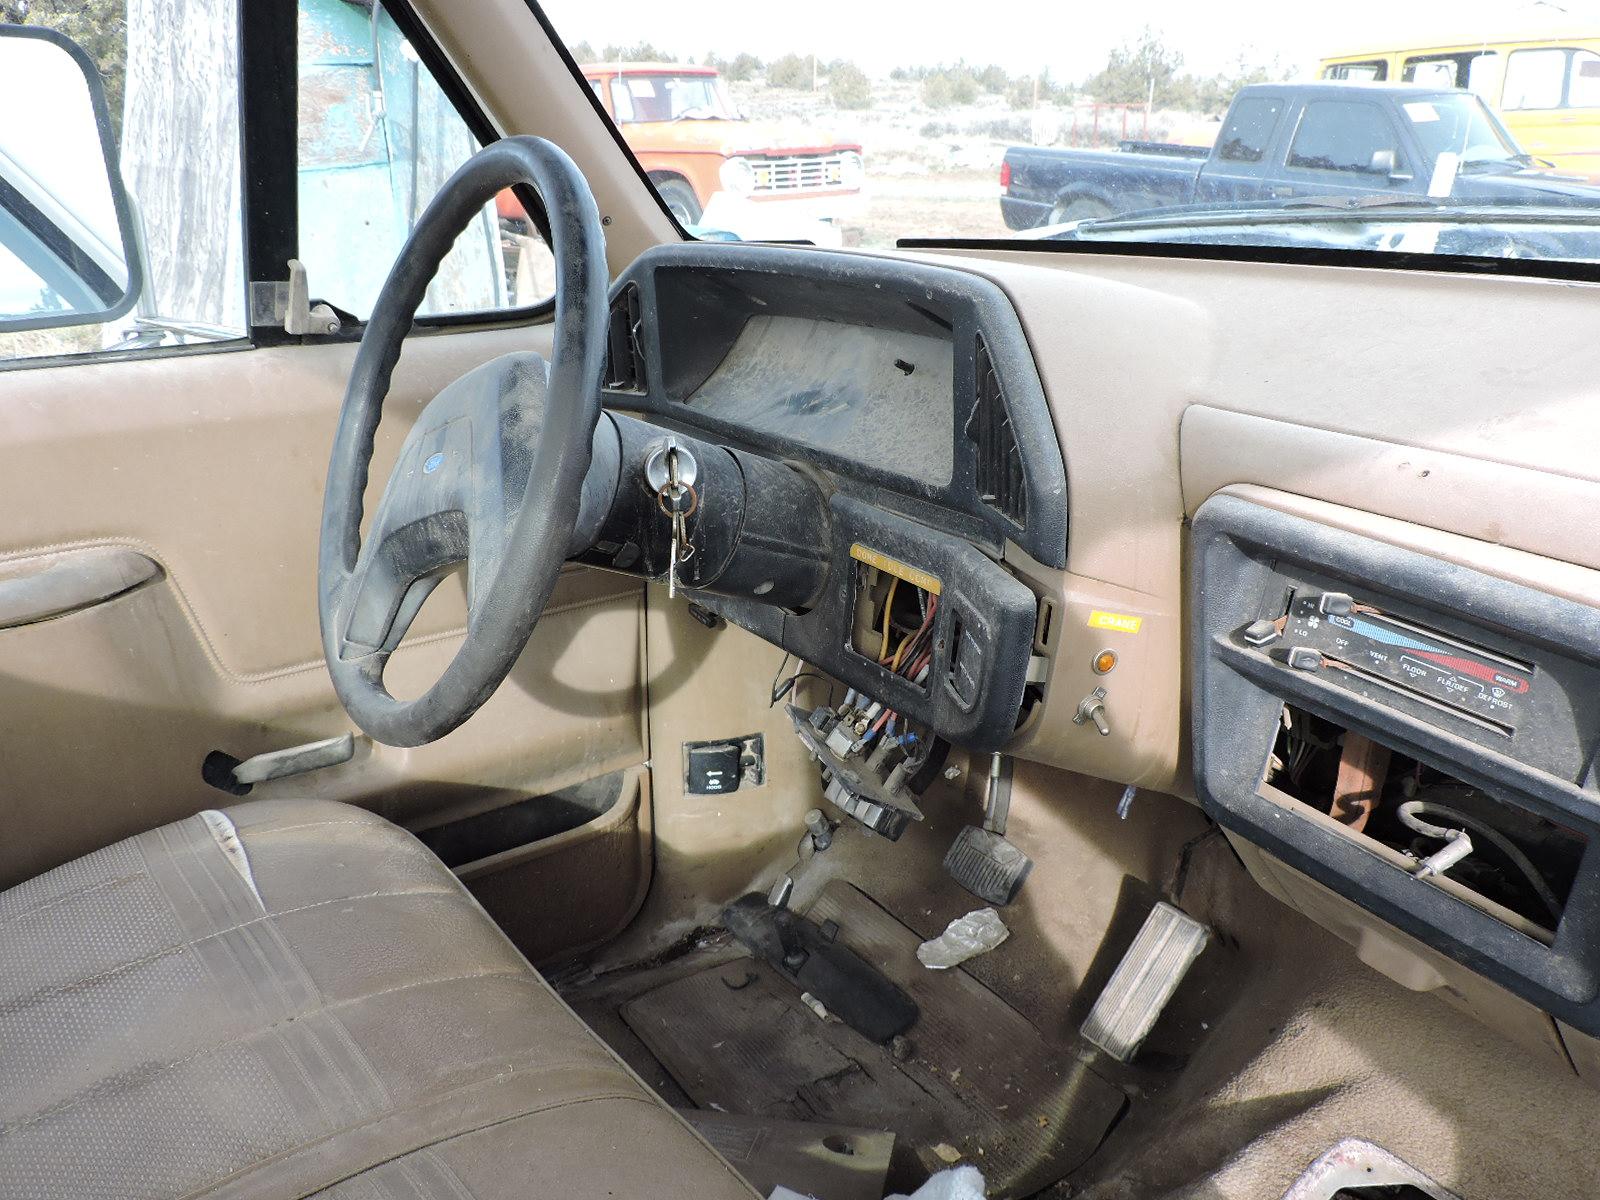 1991 Ford Regular Cab F-Super Duty (essentially an F450 by Springs and Brakes)